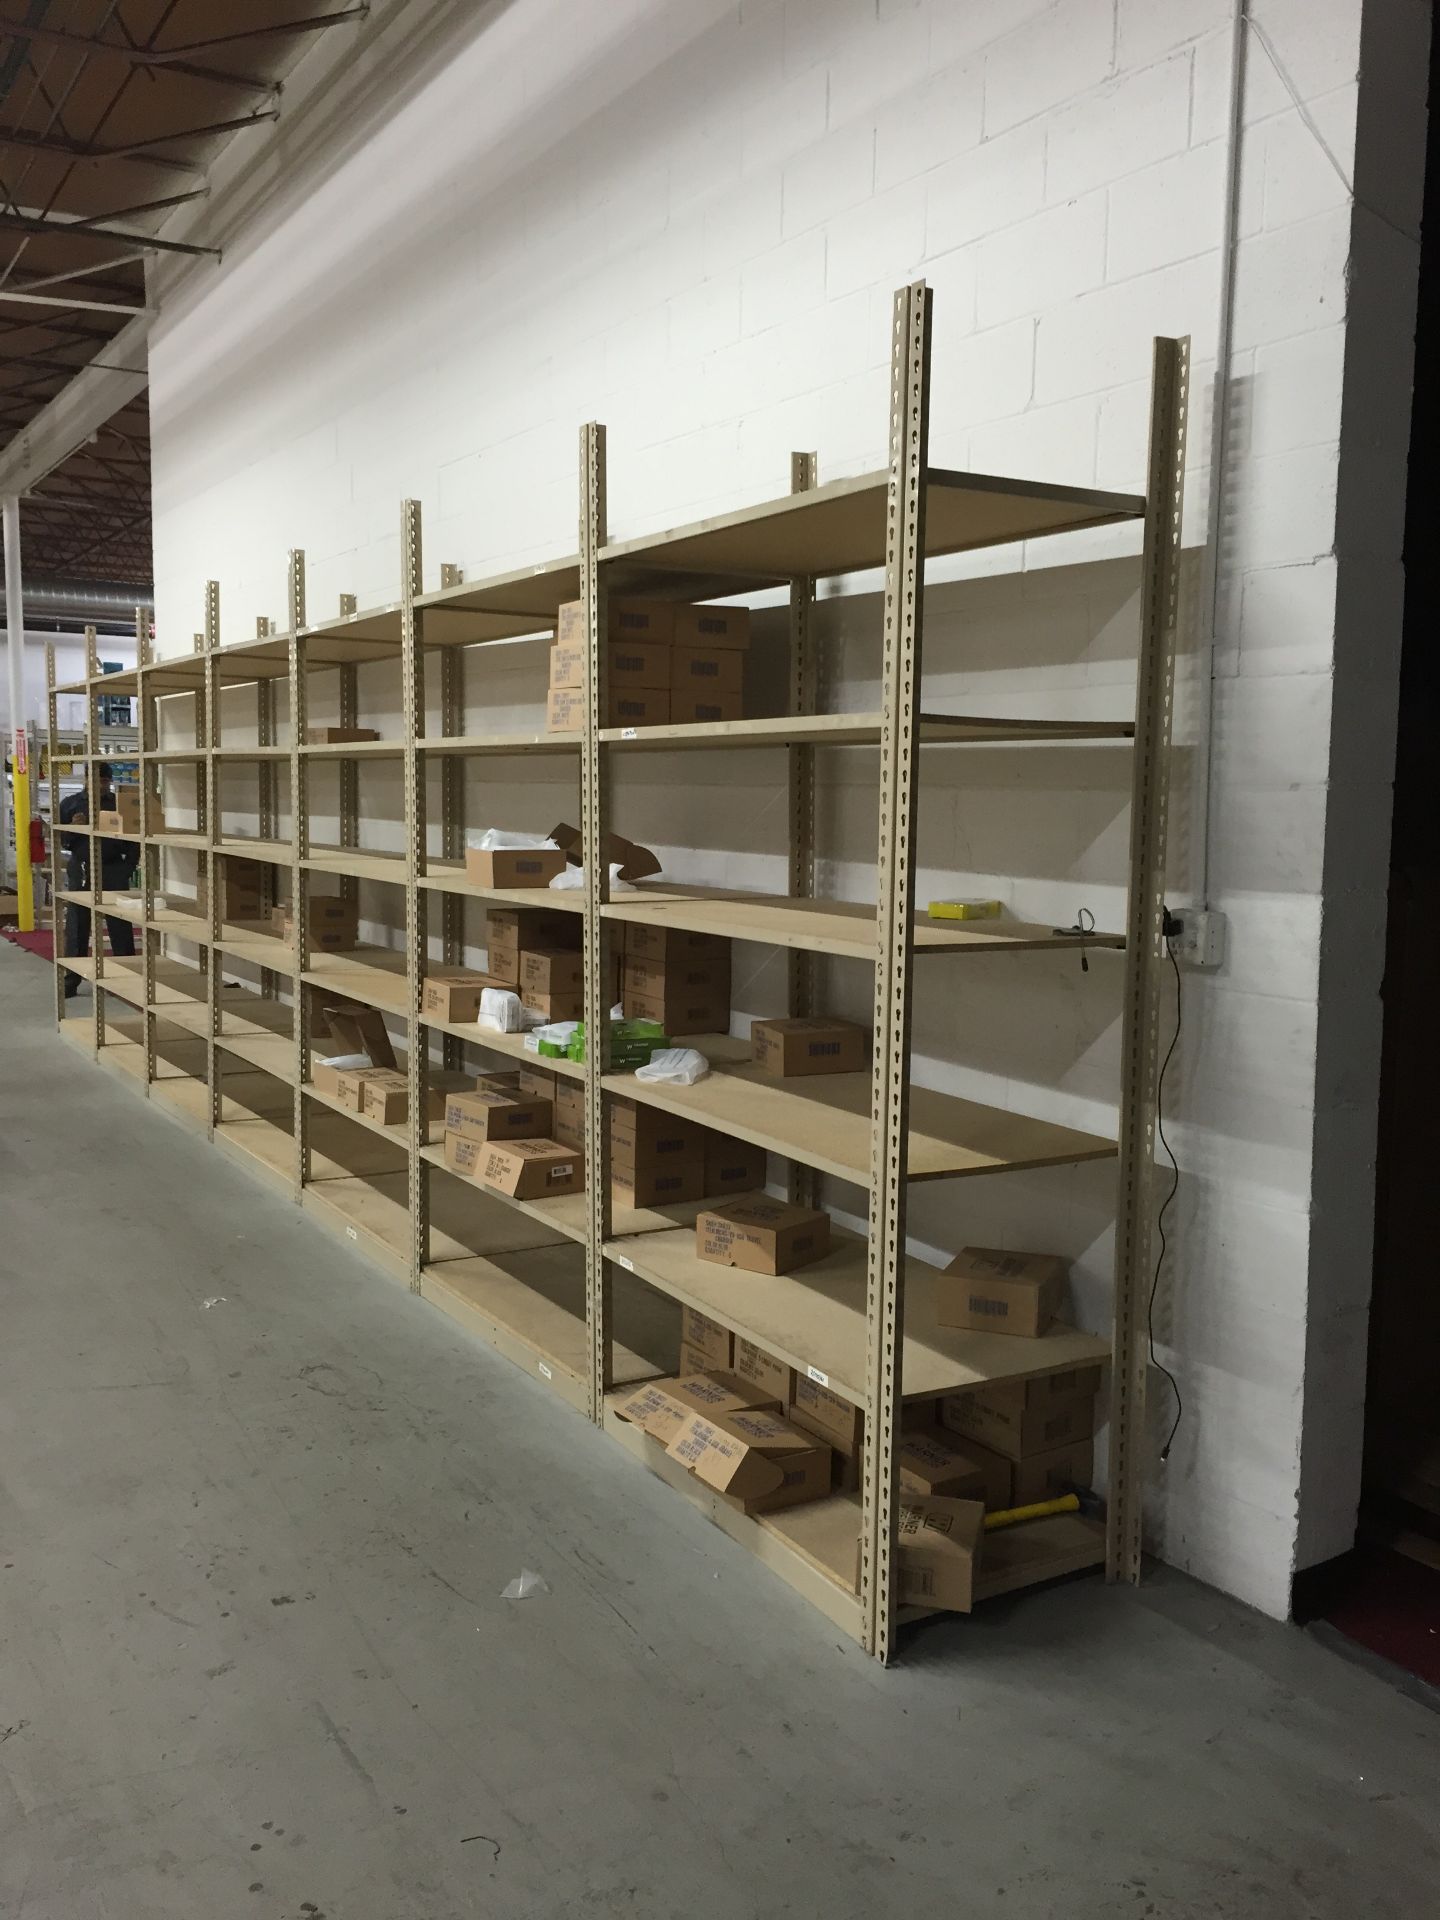 50 SECTIONS OF RIVETIER INDUSTRIAL SHELVING,  EACH SIZE 28"D X 65"W X 84"H, COLOR: MANILA, 5 SHELVES - Image 8 of 9